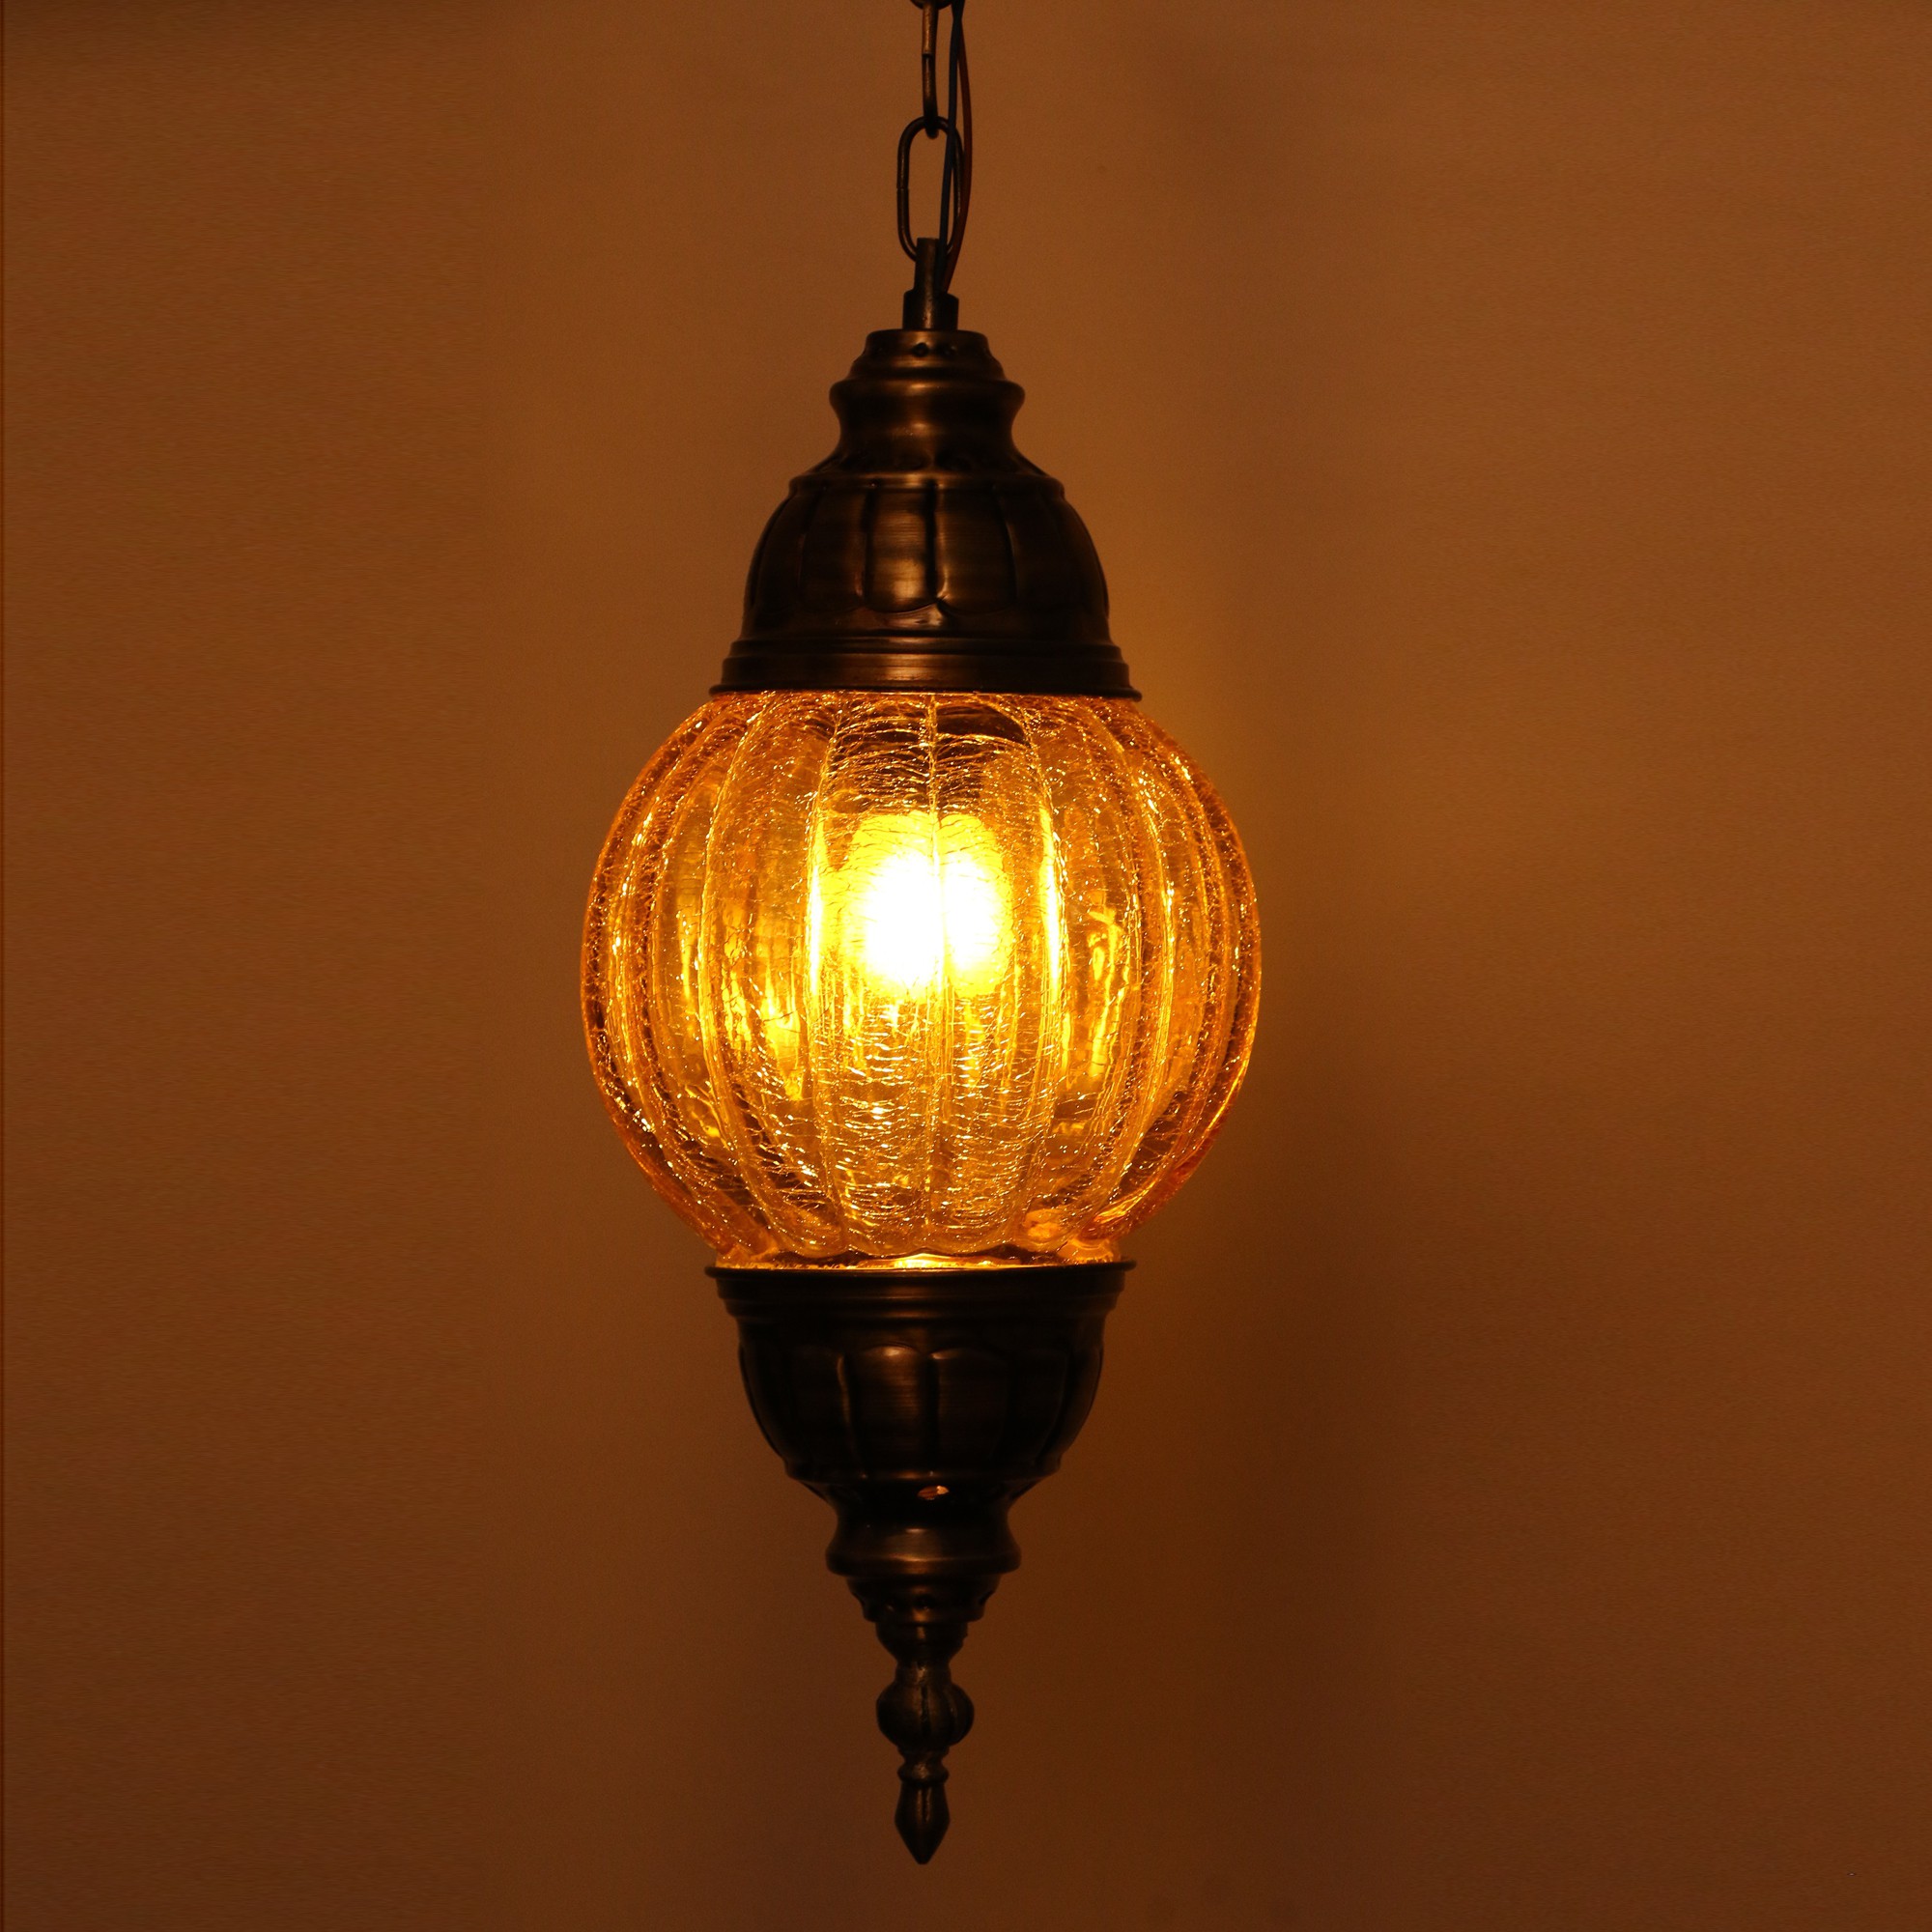 Home Royal Hanging Ceiling Lamp/ Light For Decoration -A1